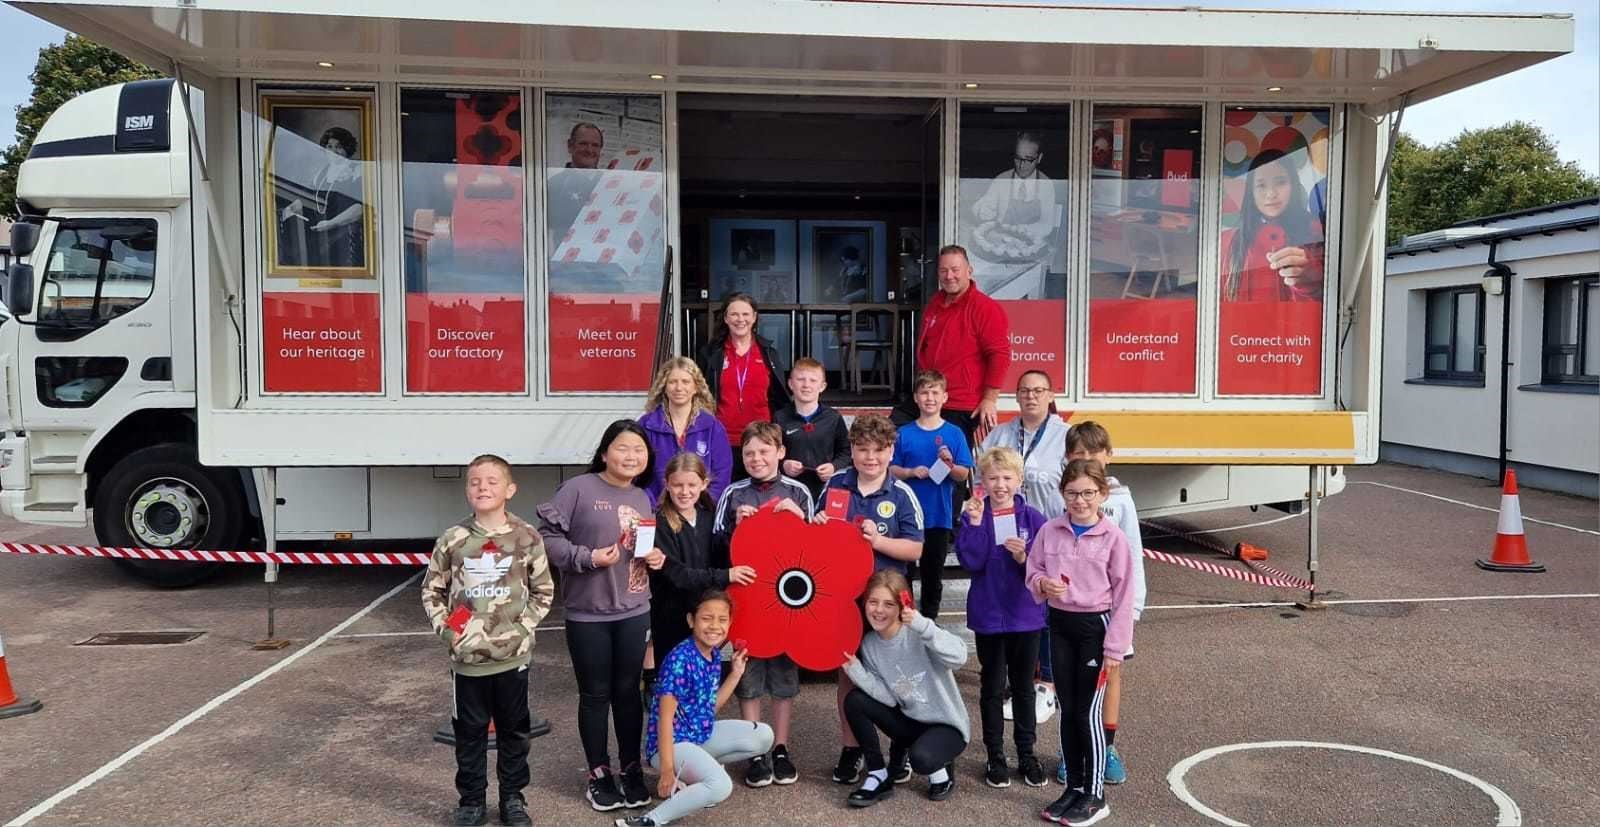 Pupils at Seafield enjoyed learning more about the charity during their visit.